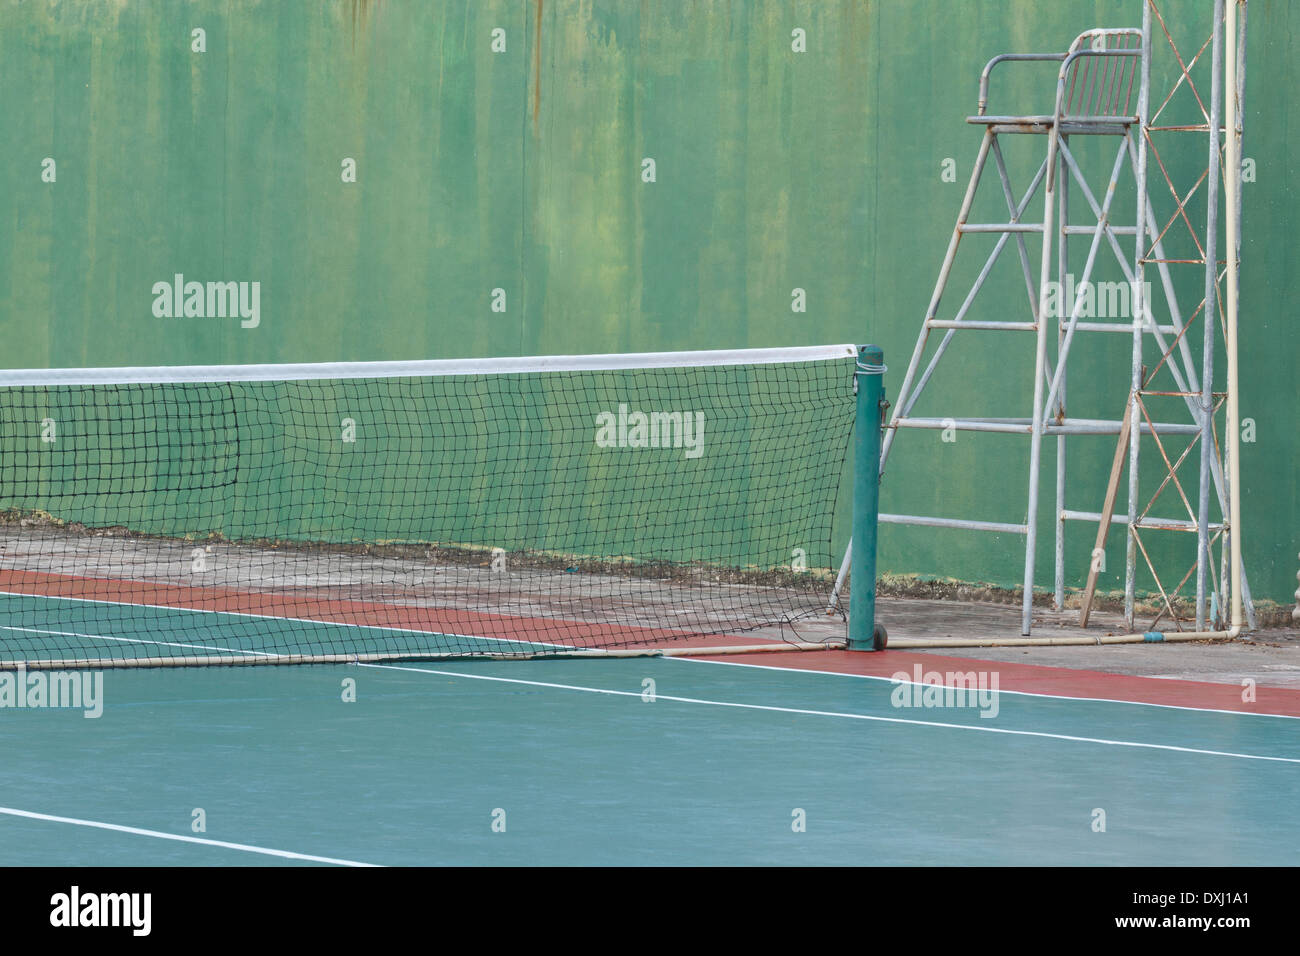 Tennis court with net (Hard court) Stock Photo